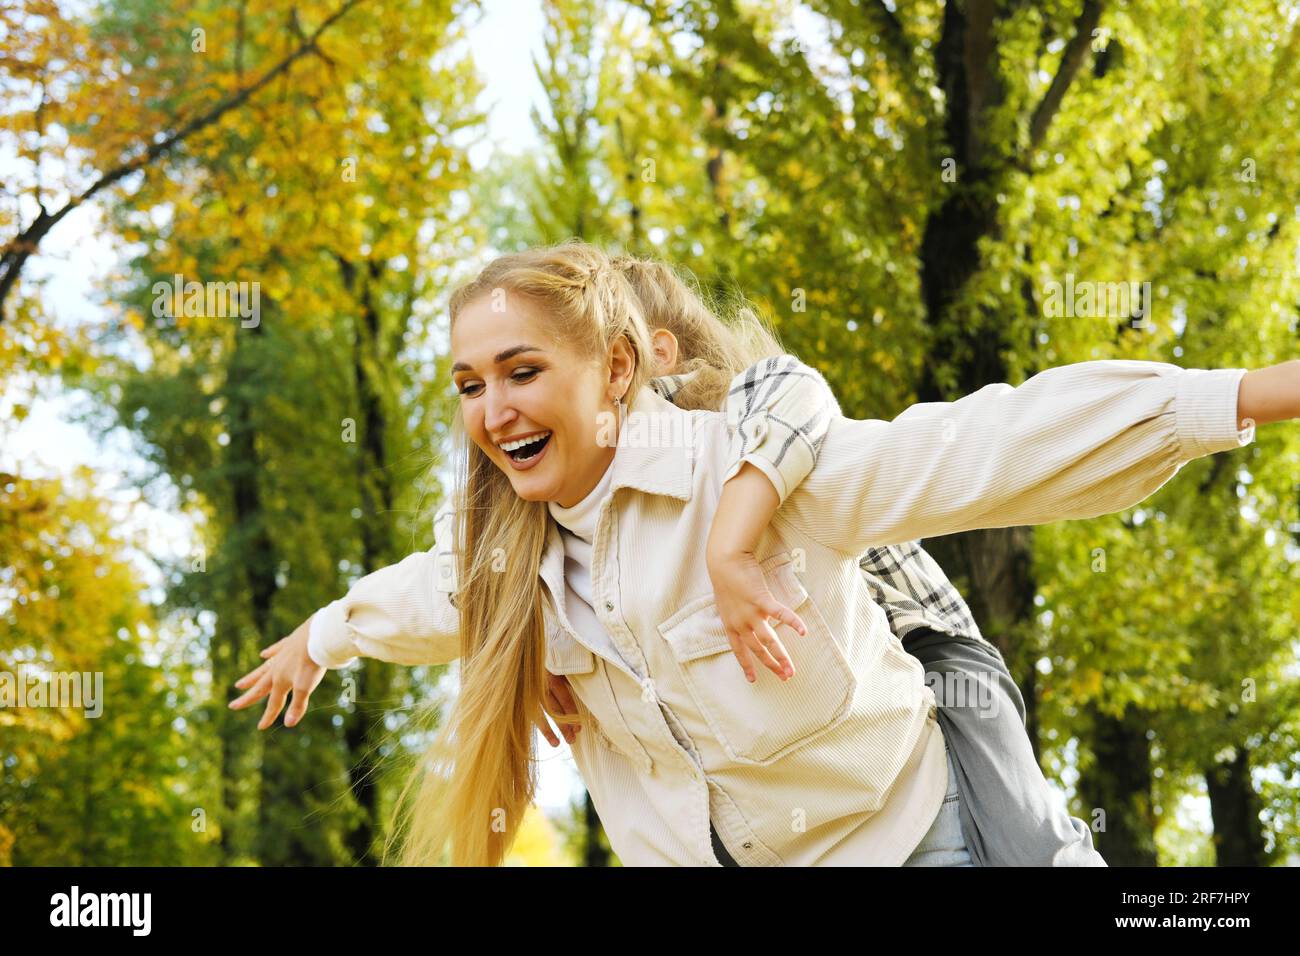 Play, flying or mother with girl on back in autumn park bonding, quality time and playing outdoors. Love, airplane and happy mom piggyback with child Stock Photo